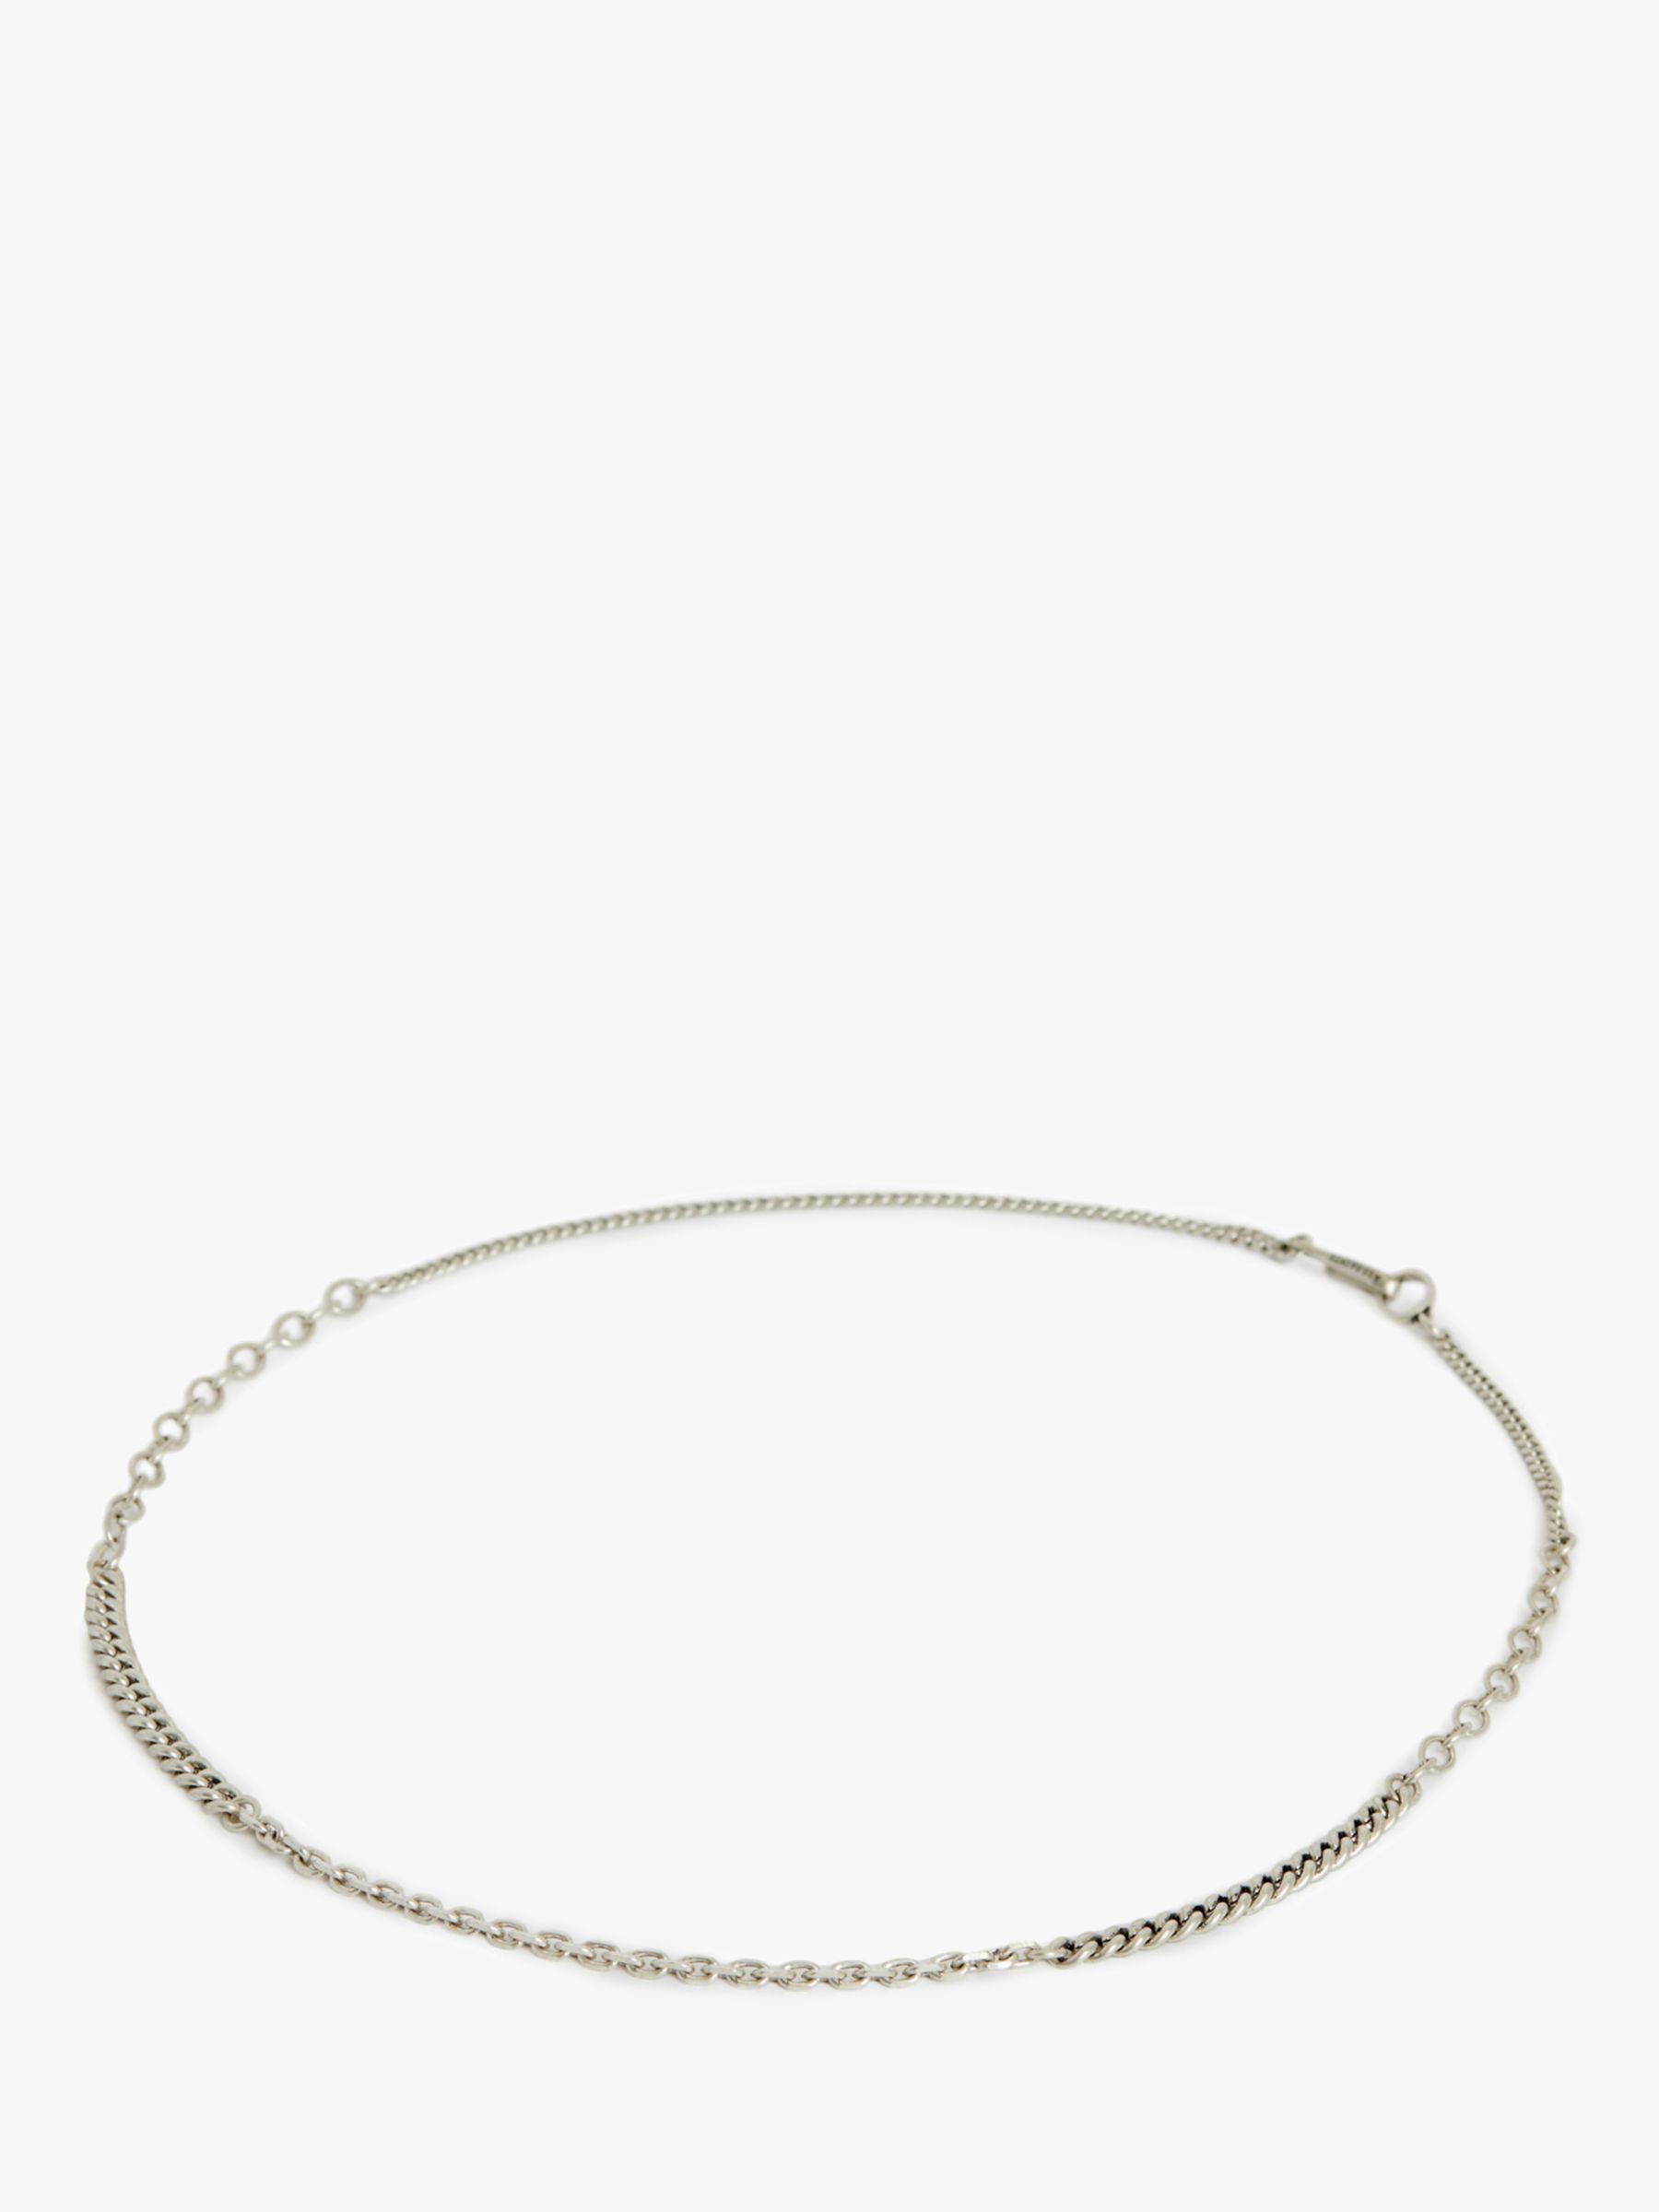 Buy AllSaints Mixed Link Chain Necklace, Silver Online at johnlewis.com